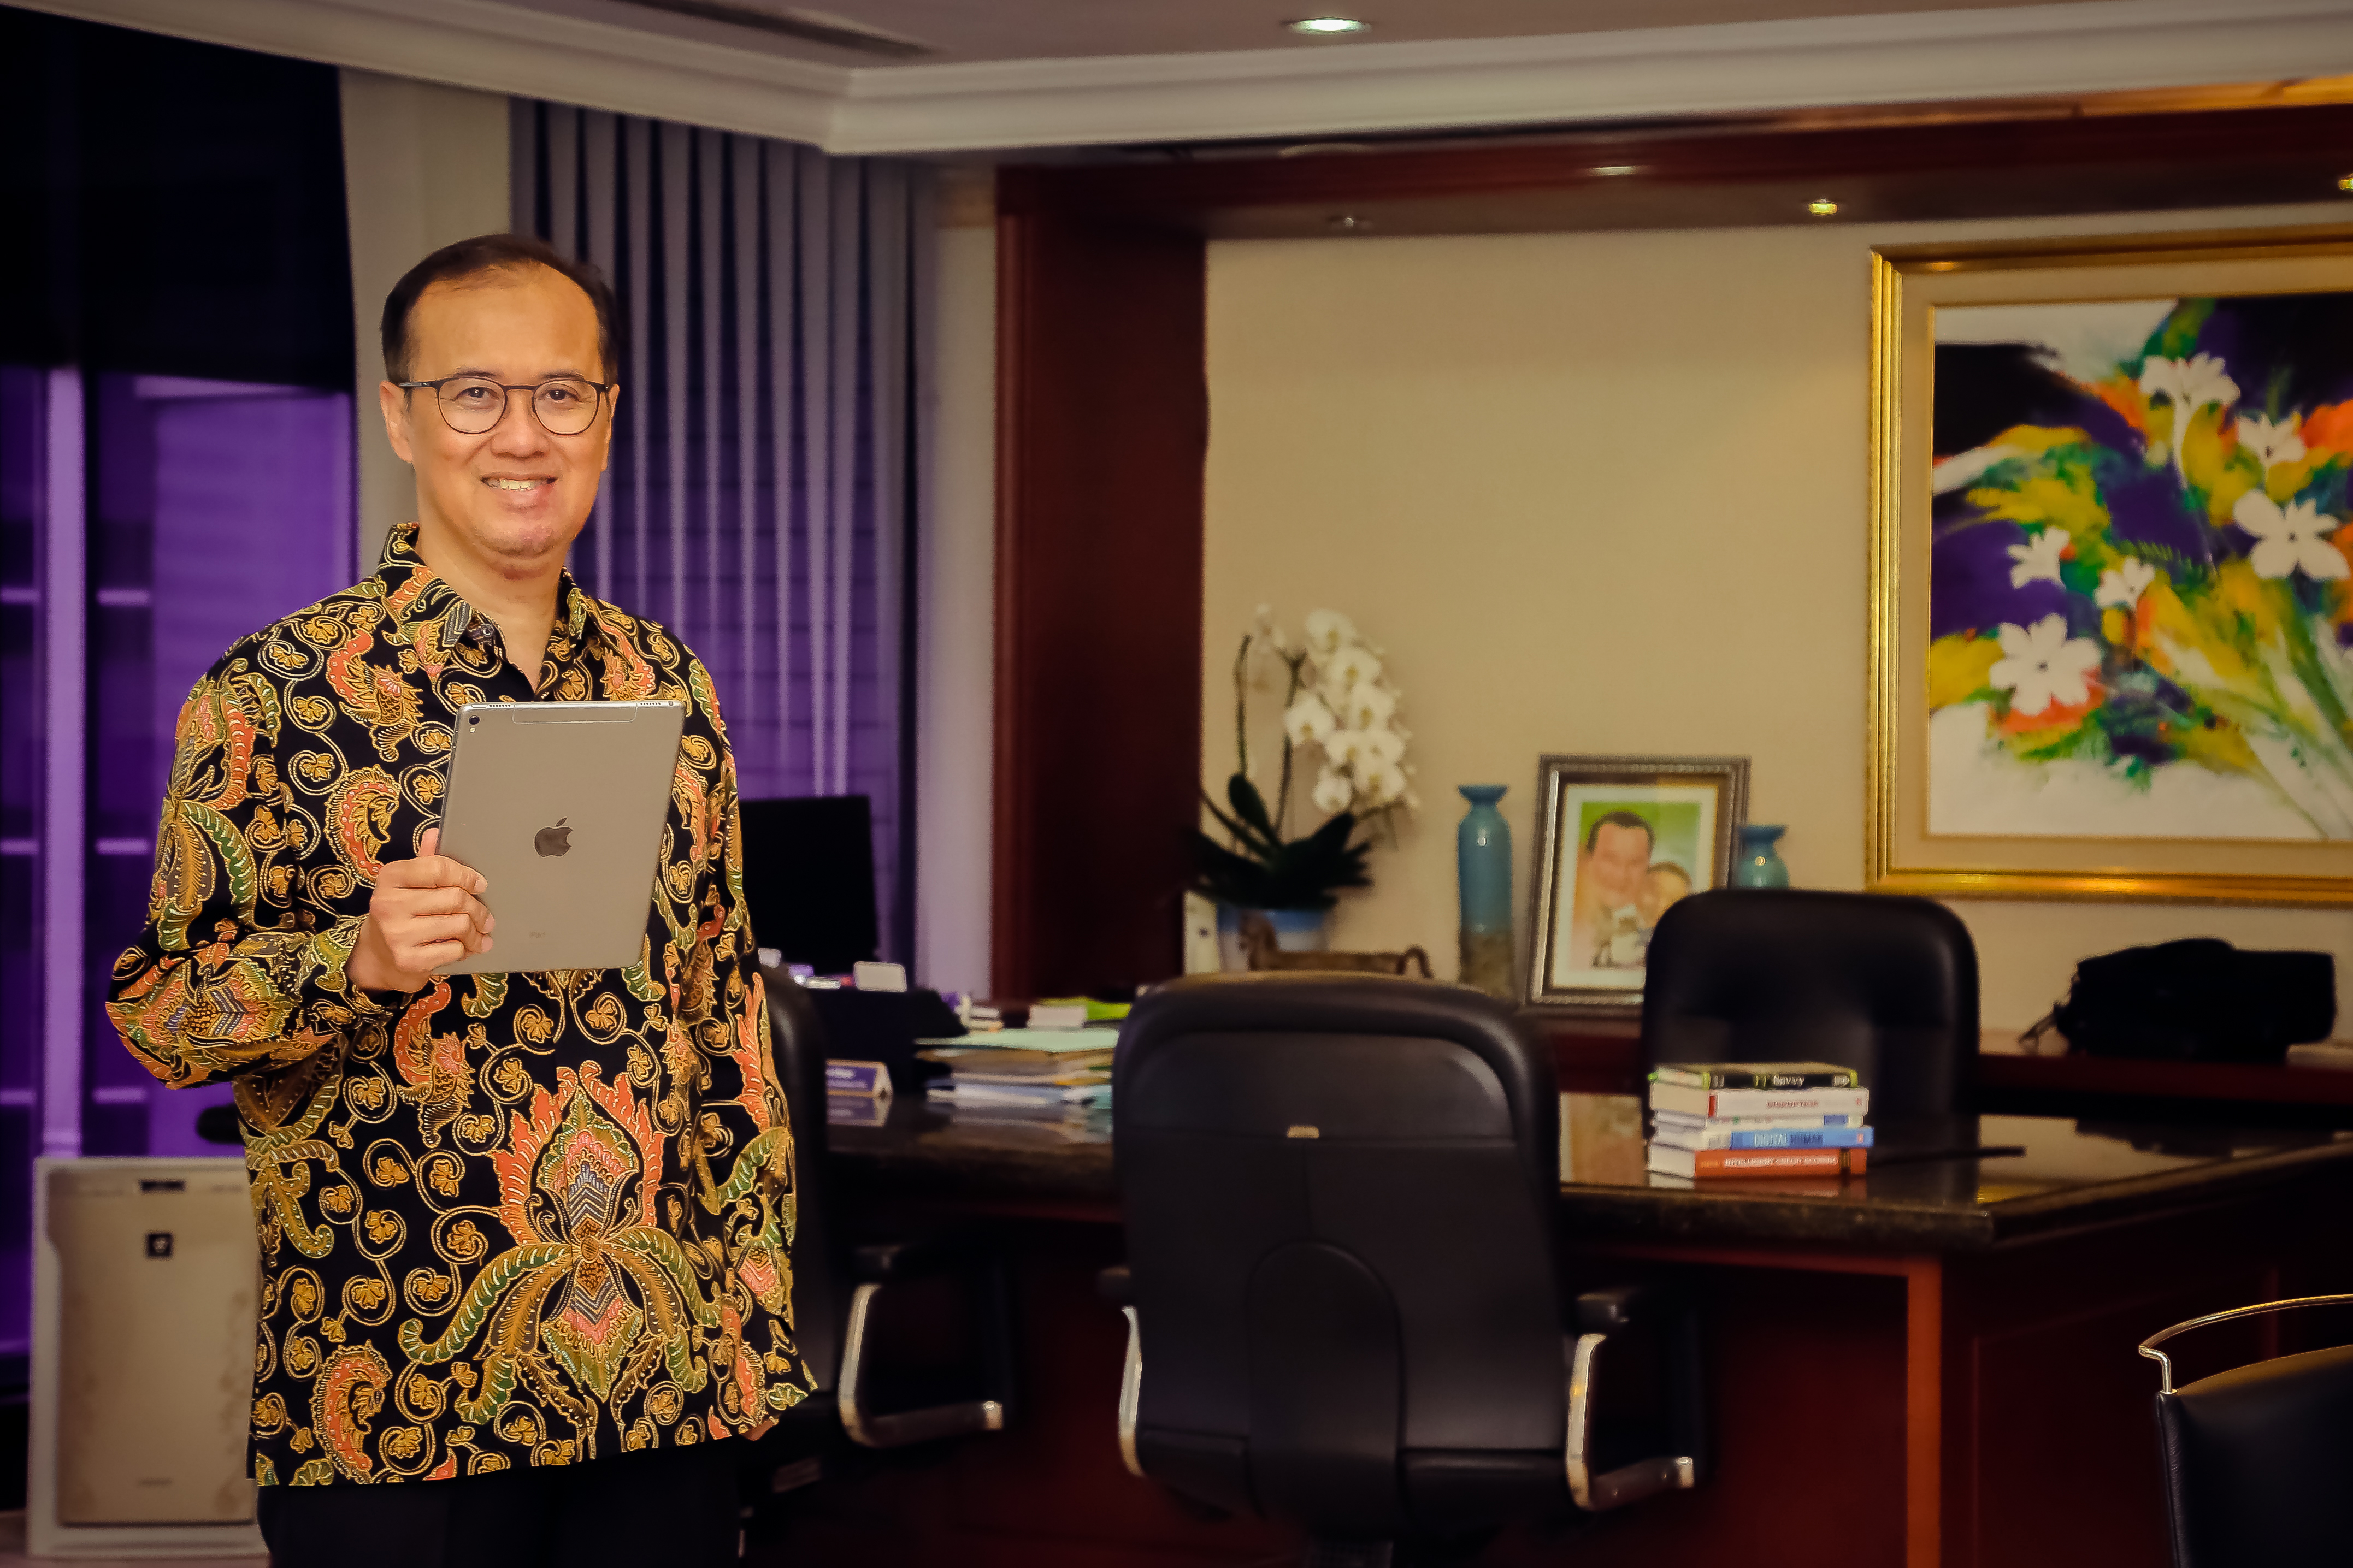 This man is transforming Indonesia’s oldest and largest lender into a digital bank